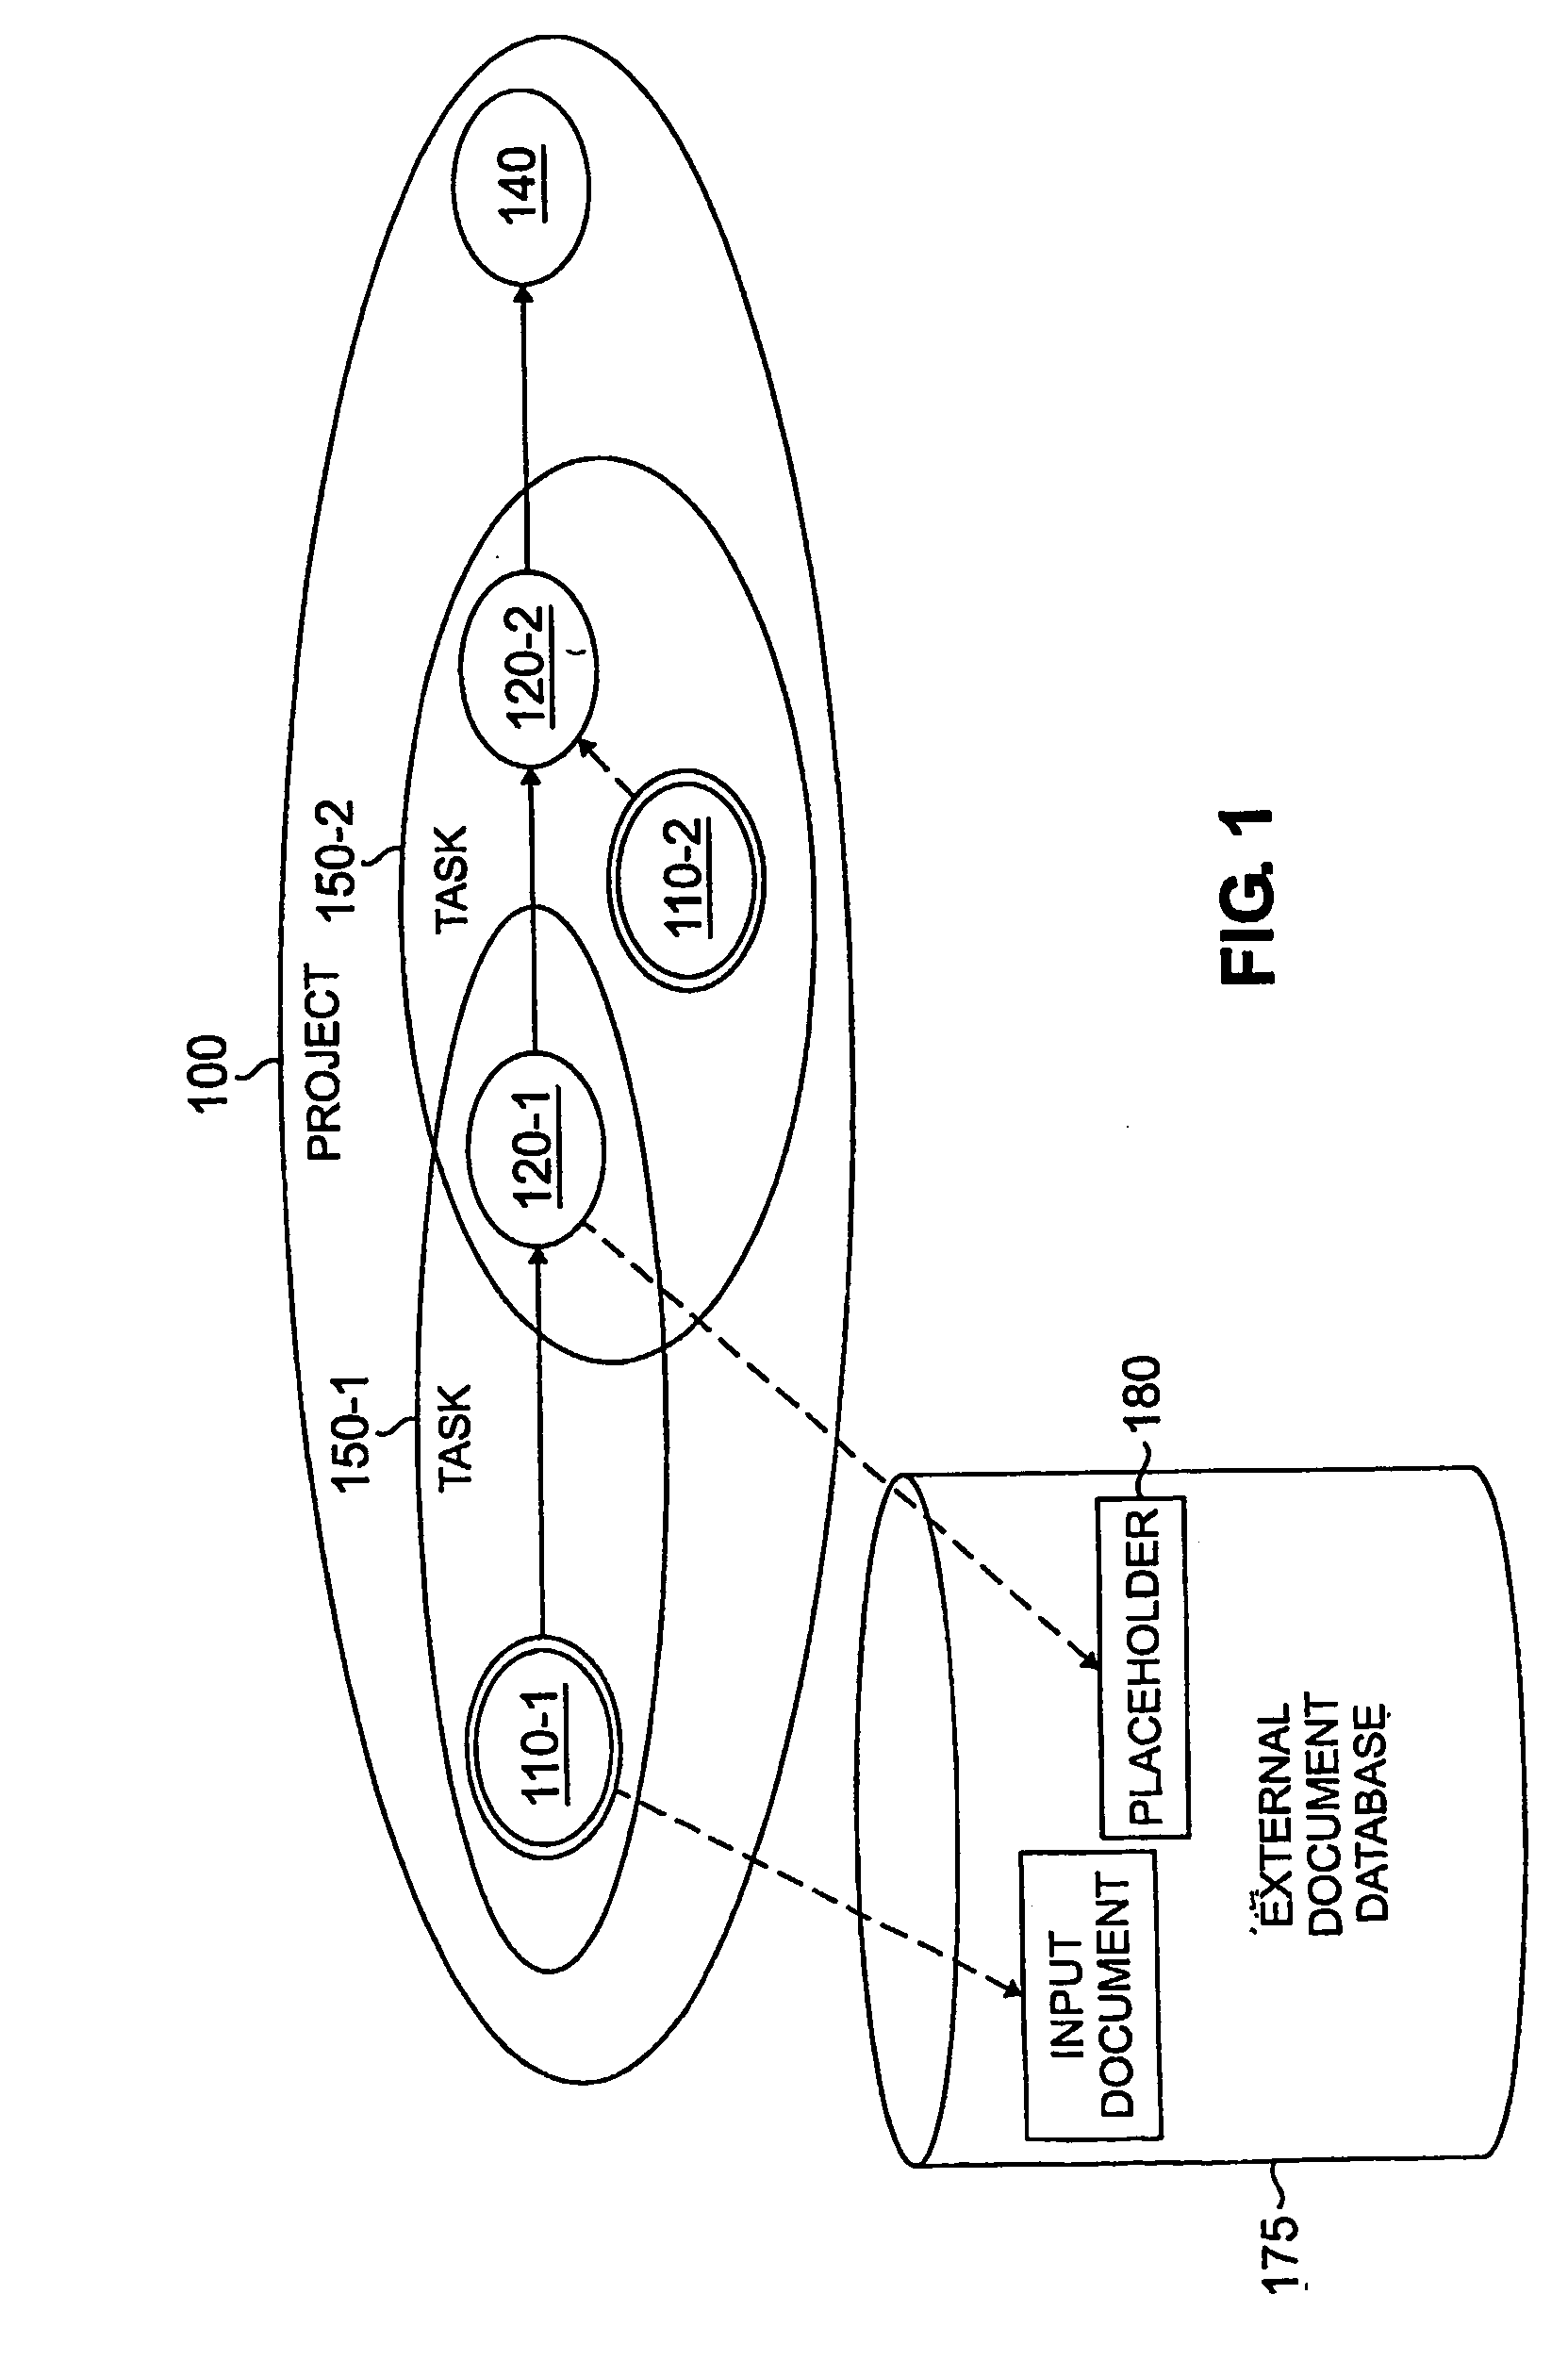 Method and apparatus for synchronous project collaboration